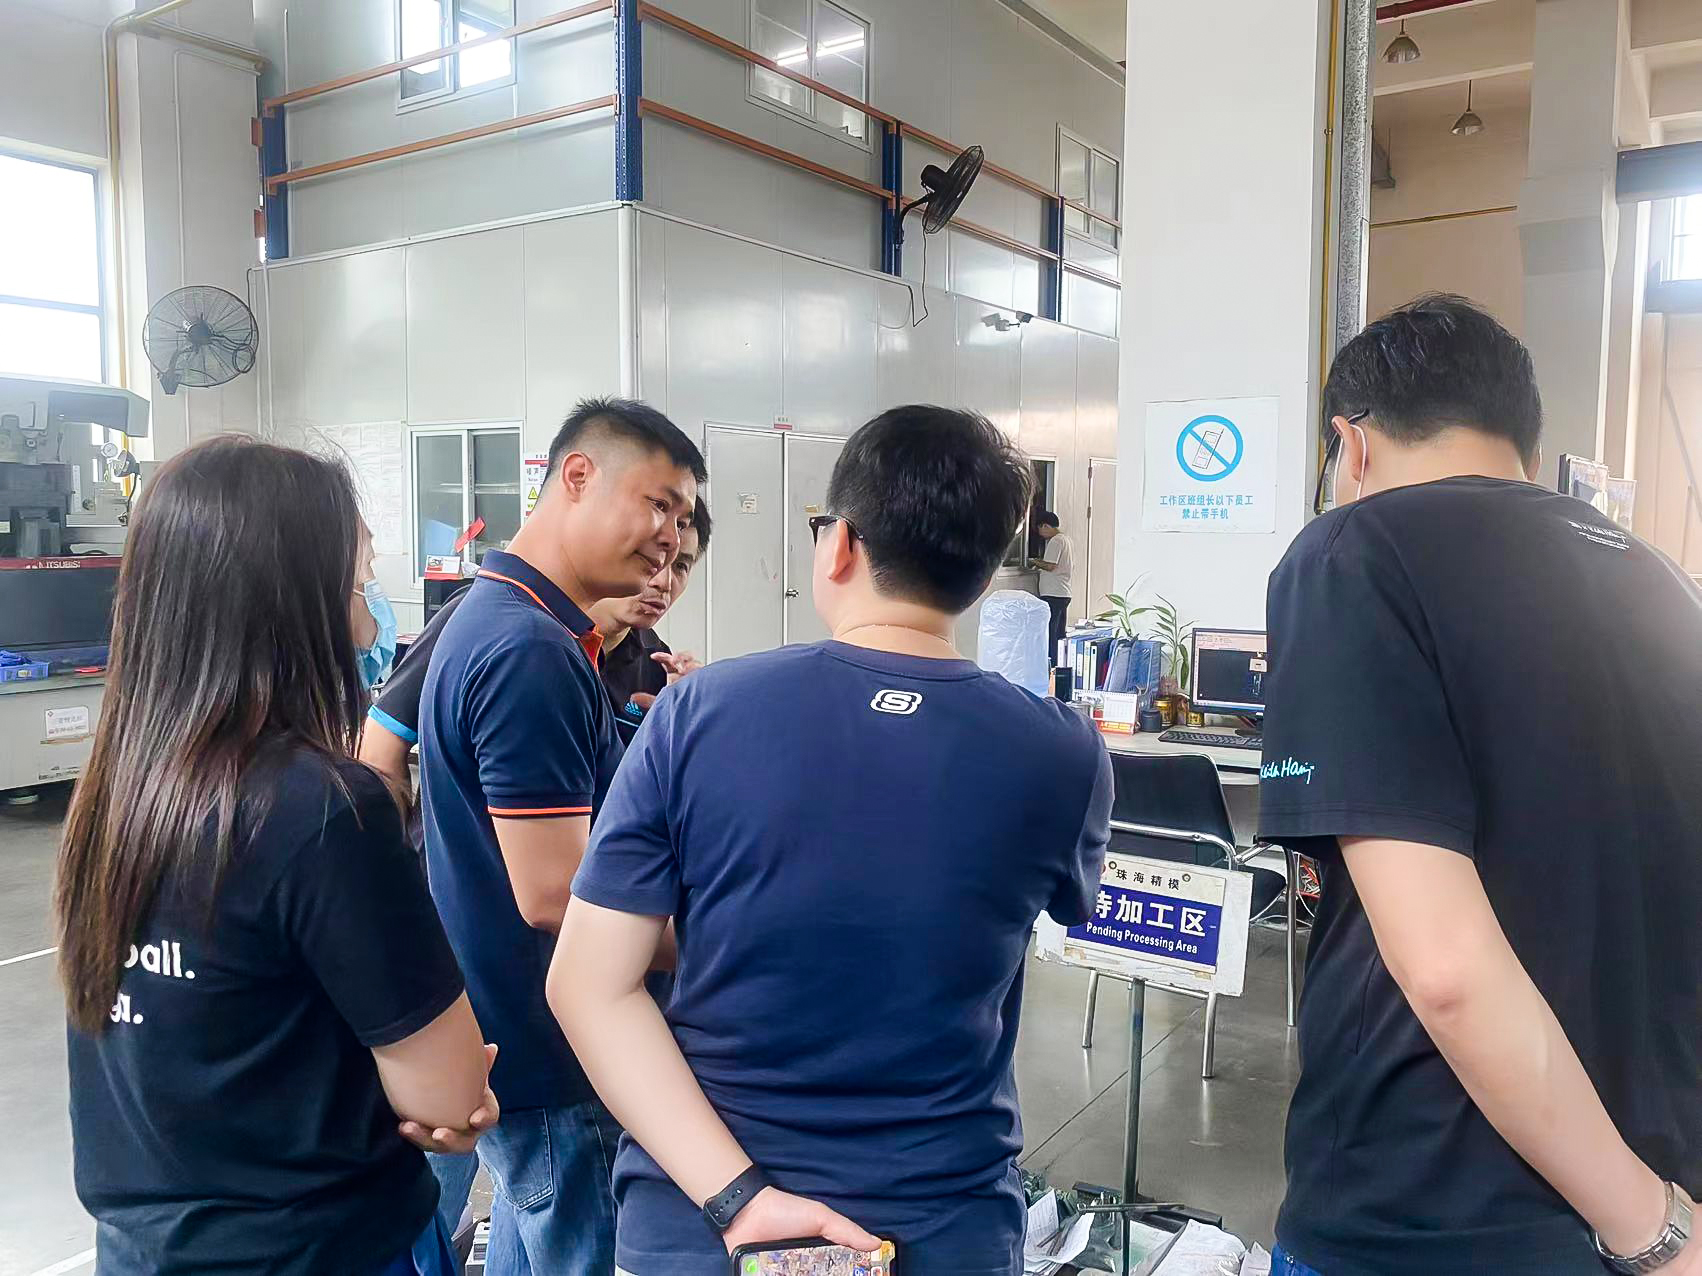 Customers visit our company to customize plastic injection molding